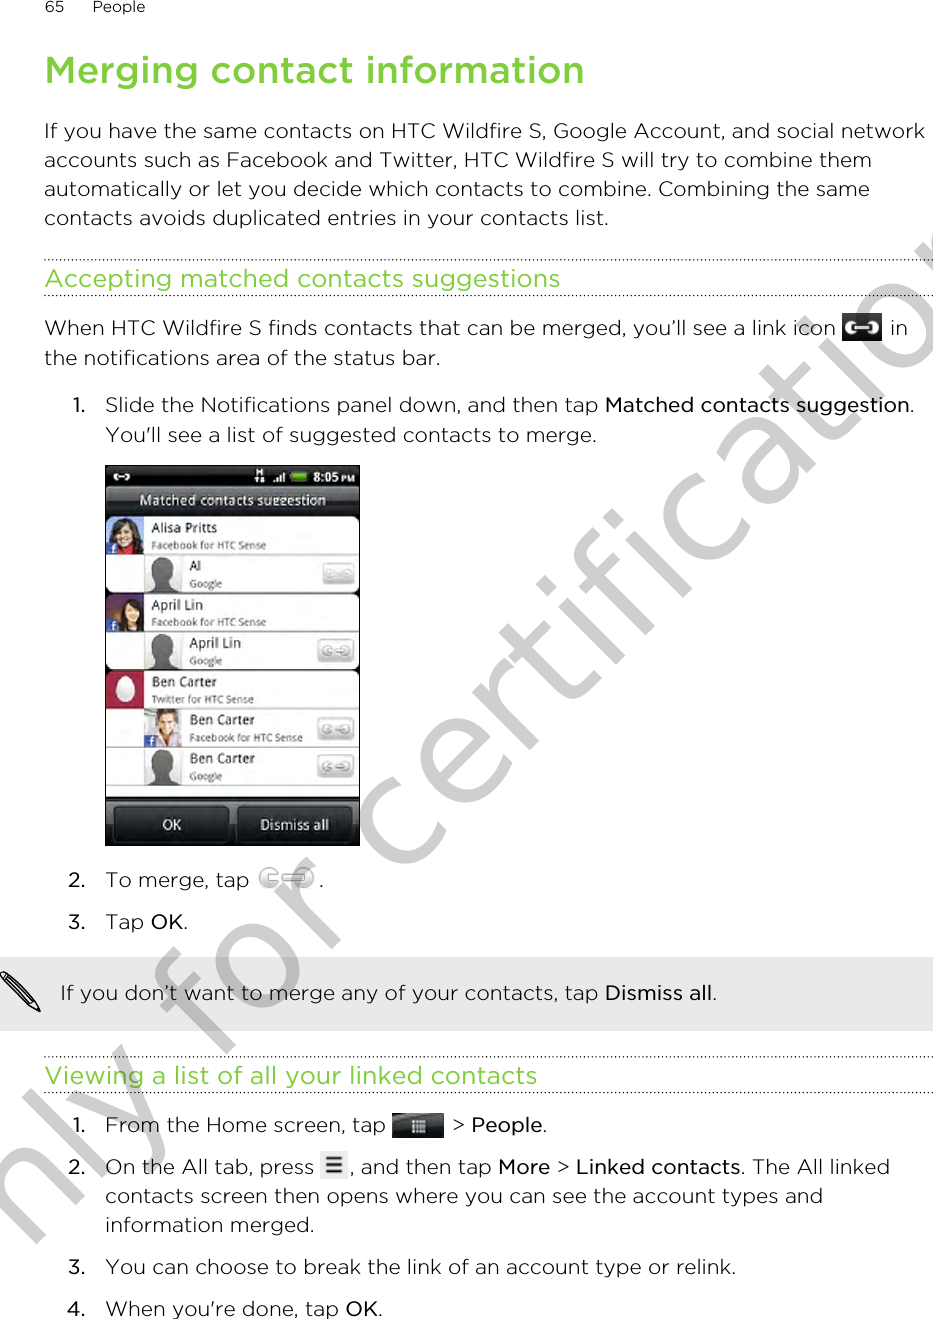 Merging contact informationIf you have the same contacts on HTC Wildfire S, Google Account, and social networkaccounts such as Facebook and Twitter, HTC Wildfire S will try to combine themautomatically or let you decide which contacts to combine. Combining the samecontacts avoids duplicated entries in your contacts list.Accepting matched contacts suggestionsWhen HTC Wildfire S finds contacts that can be merged, you’ll see a link icon   inthe notifications area of the status bar.1. Slide the Notifications panel down, and then tap Matched contacts suggestion.You&apos;ll see a list of suggested contacts to merge.2. To merge, tap  .3. Tap OK.If you don’t want to merge any of your contacts, tap Dismiss all.Viewing a list of all your linked contacts1. From the Home screen, tap   &gt; People.2. On the All tab, press  , and then tap More &gt; Linked contacts. The All linkedcontacts screen then opens where you can see the account types andinformation merged.3. You can choose to break the link of an account type or relink.4. When you&apos;re done, tap OK.65 PeopleOnly for certification